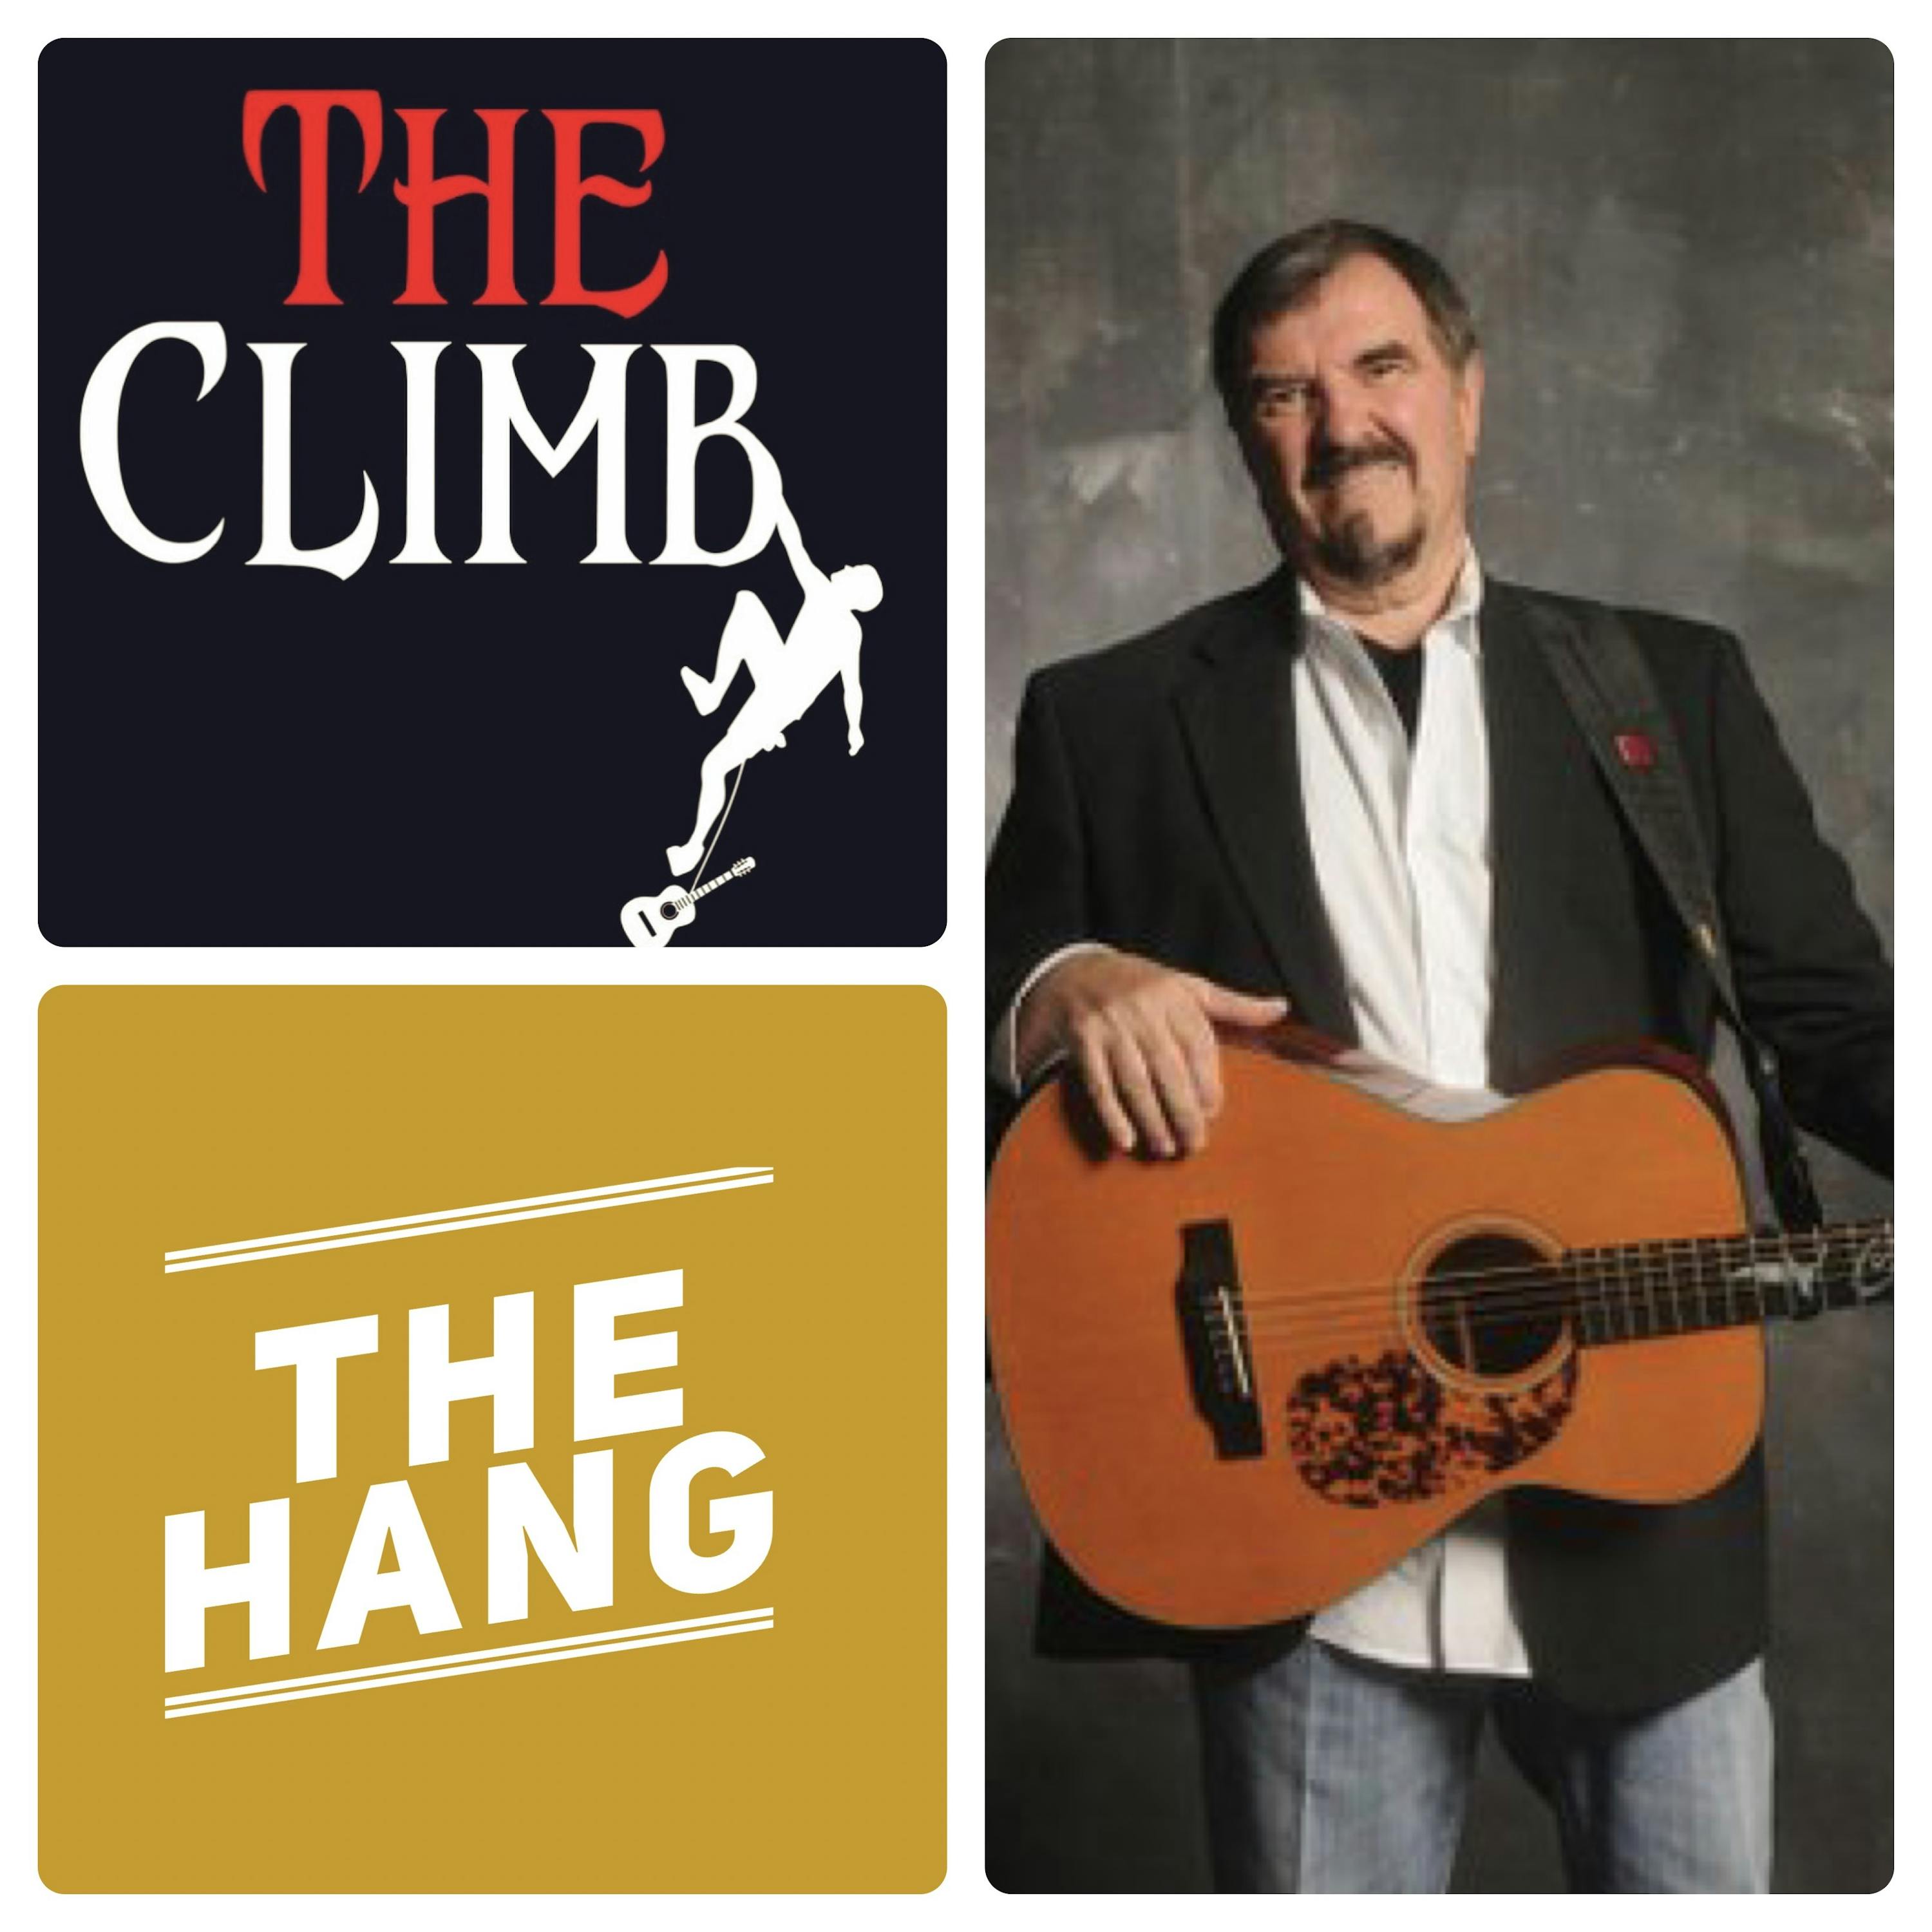 Songwriting Pro’s ”The Hang” with Hit Songwriter, Larry Cordle